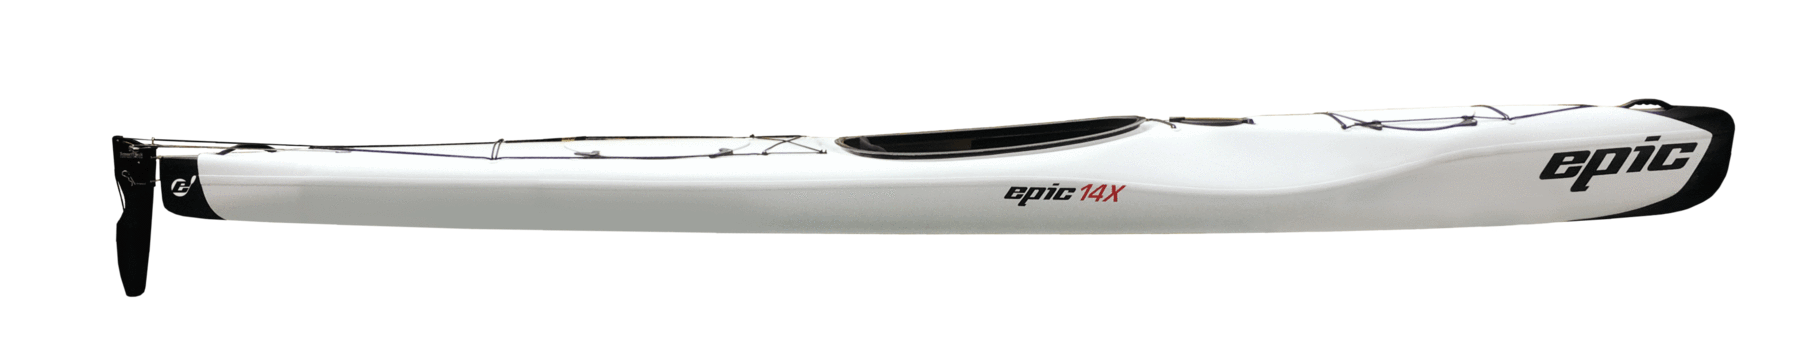 Epic 14X Kayak  From $4,375